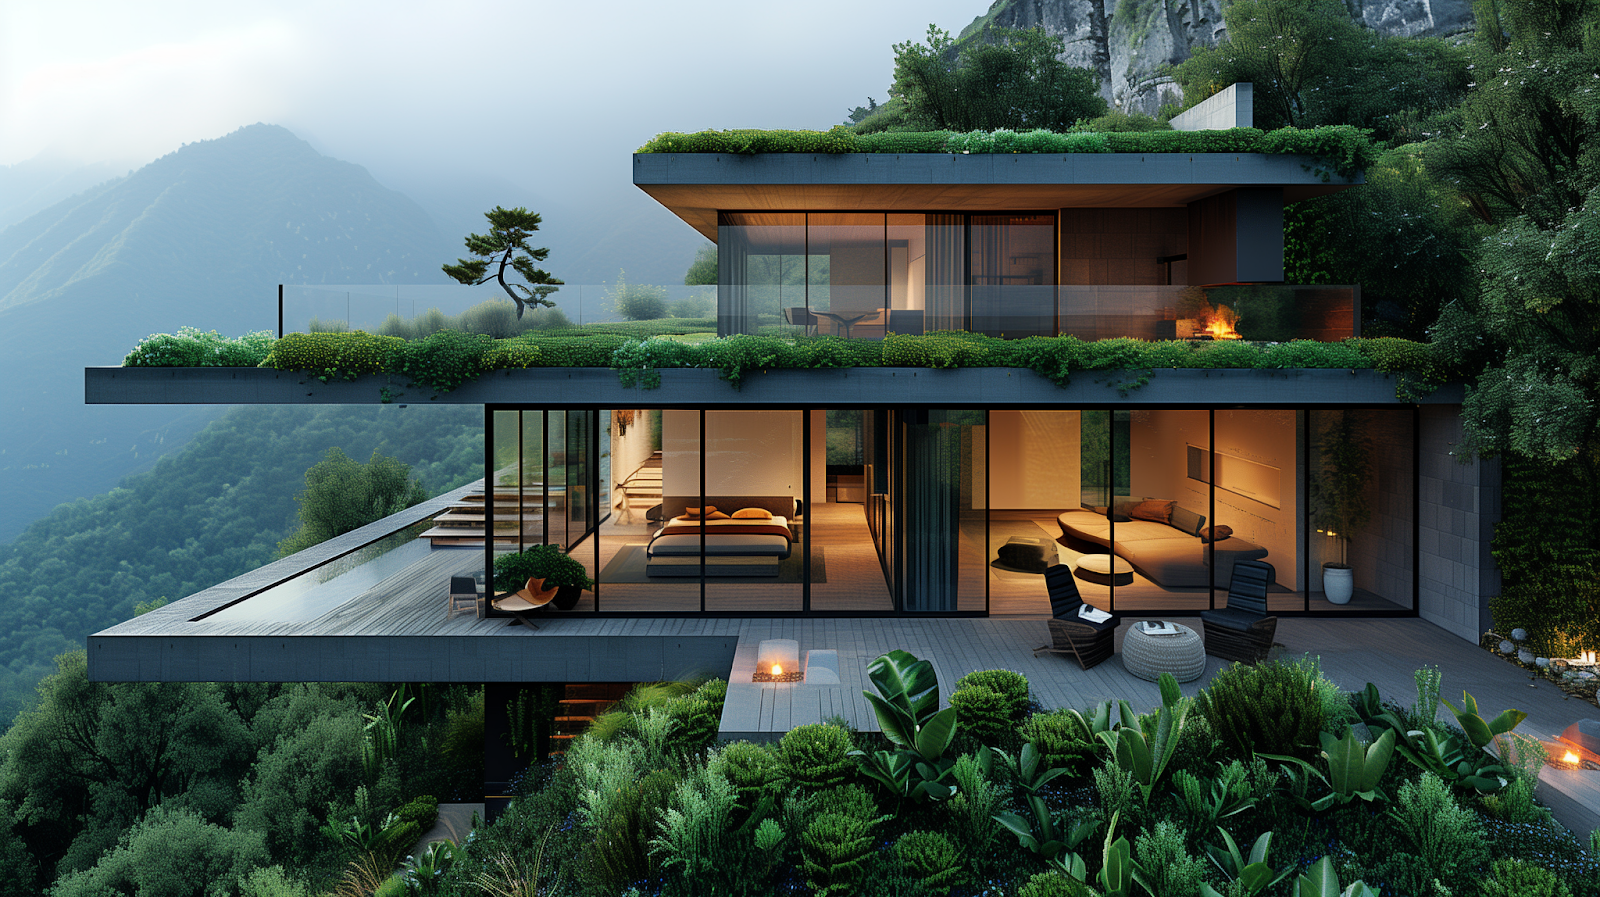 Cantilevered modern villa with glass walls and green roof, seamlessly blending into the mountainous landscape